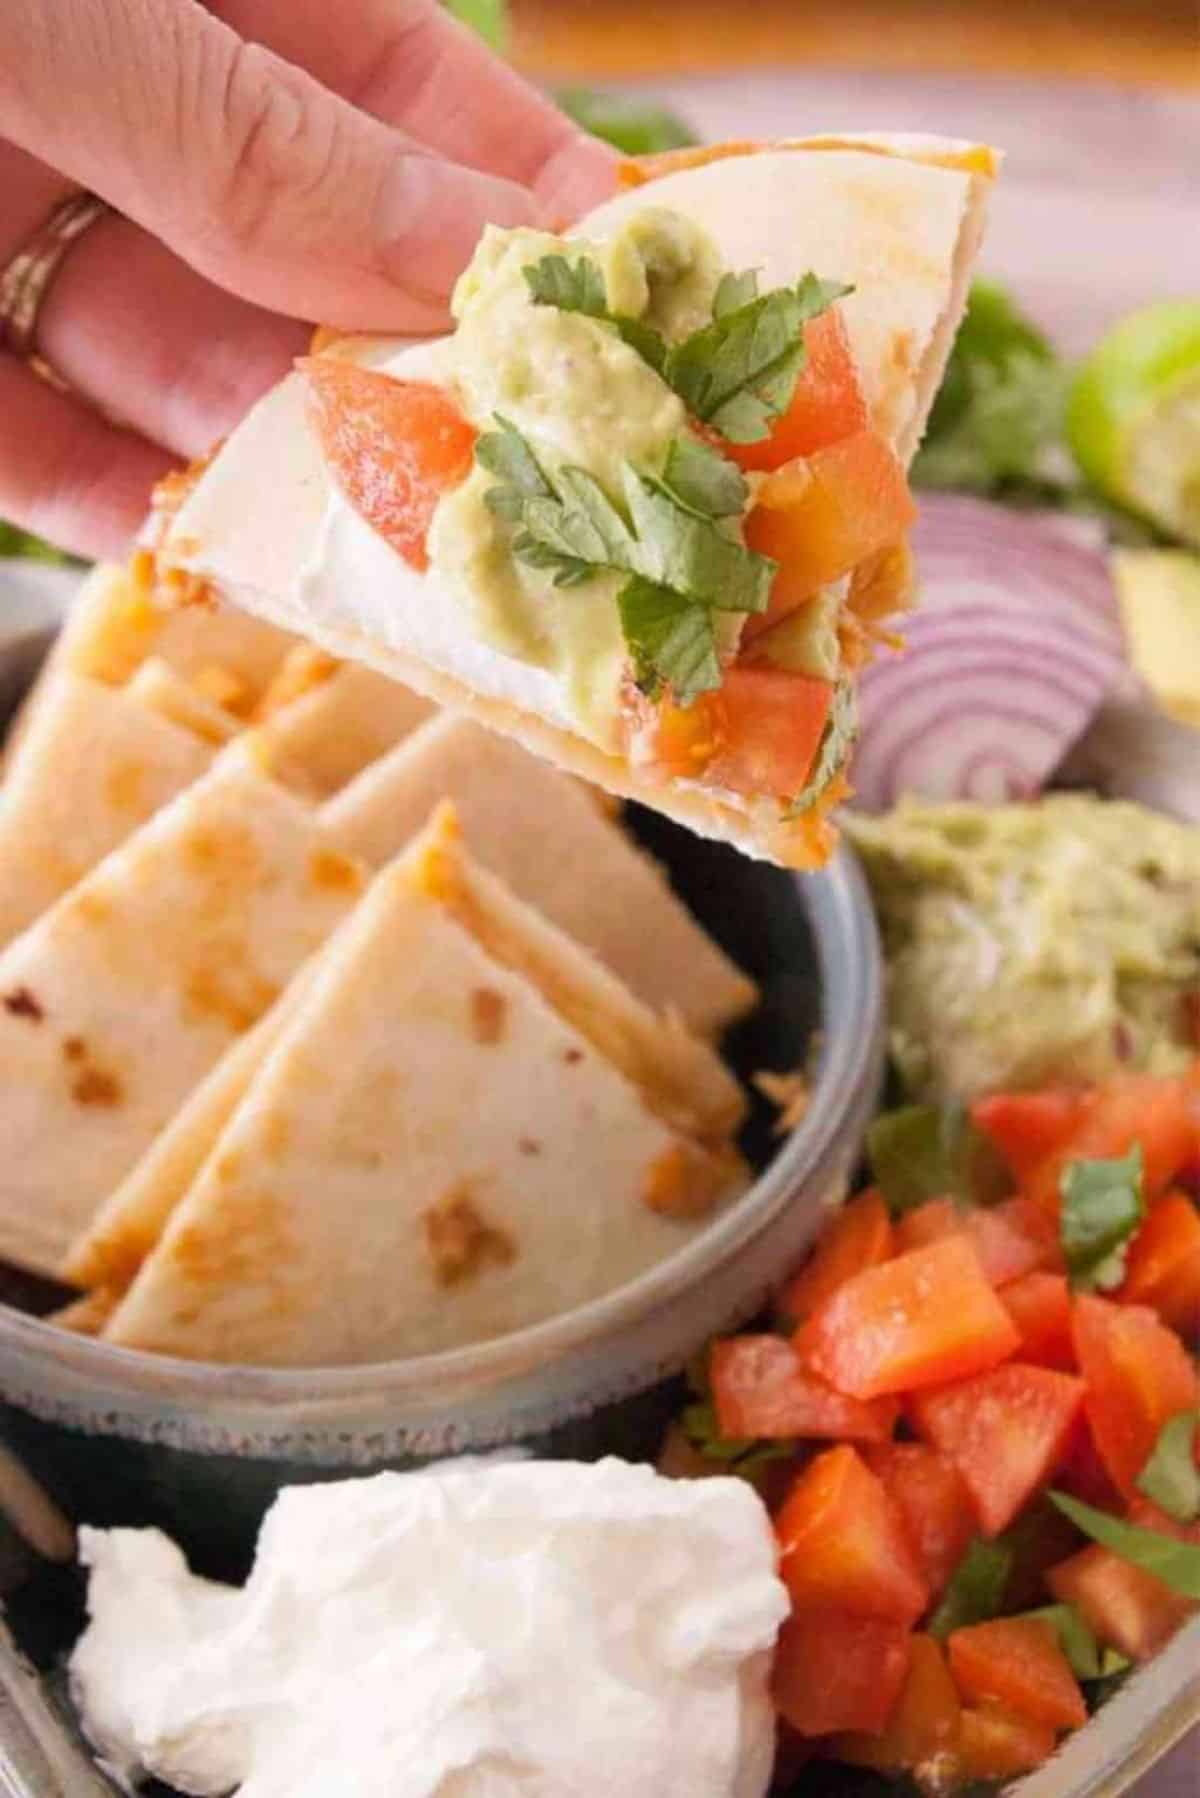 Tasty Buffalo Chicken Quesadillas on a tray, one held by hand.